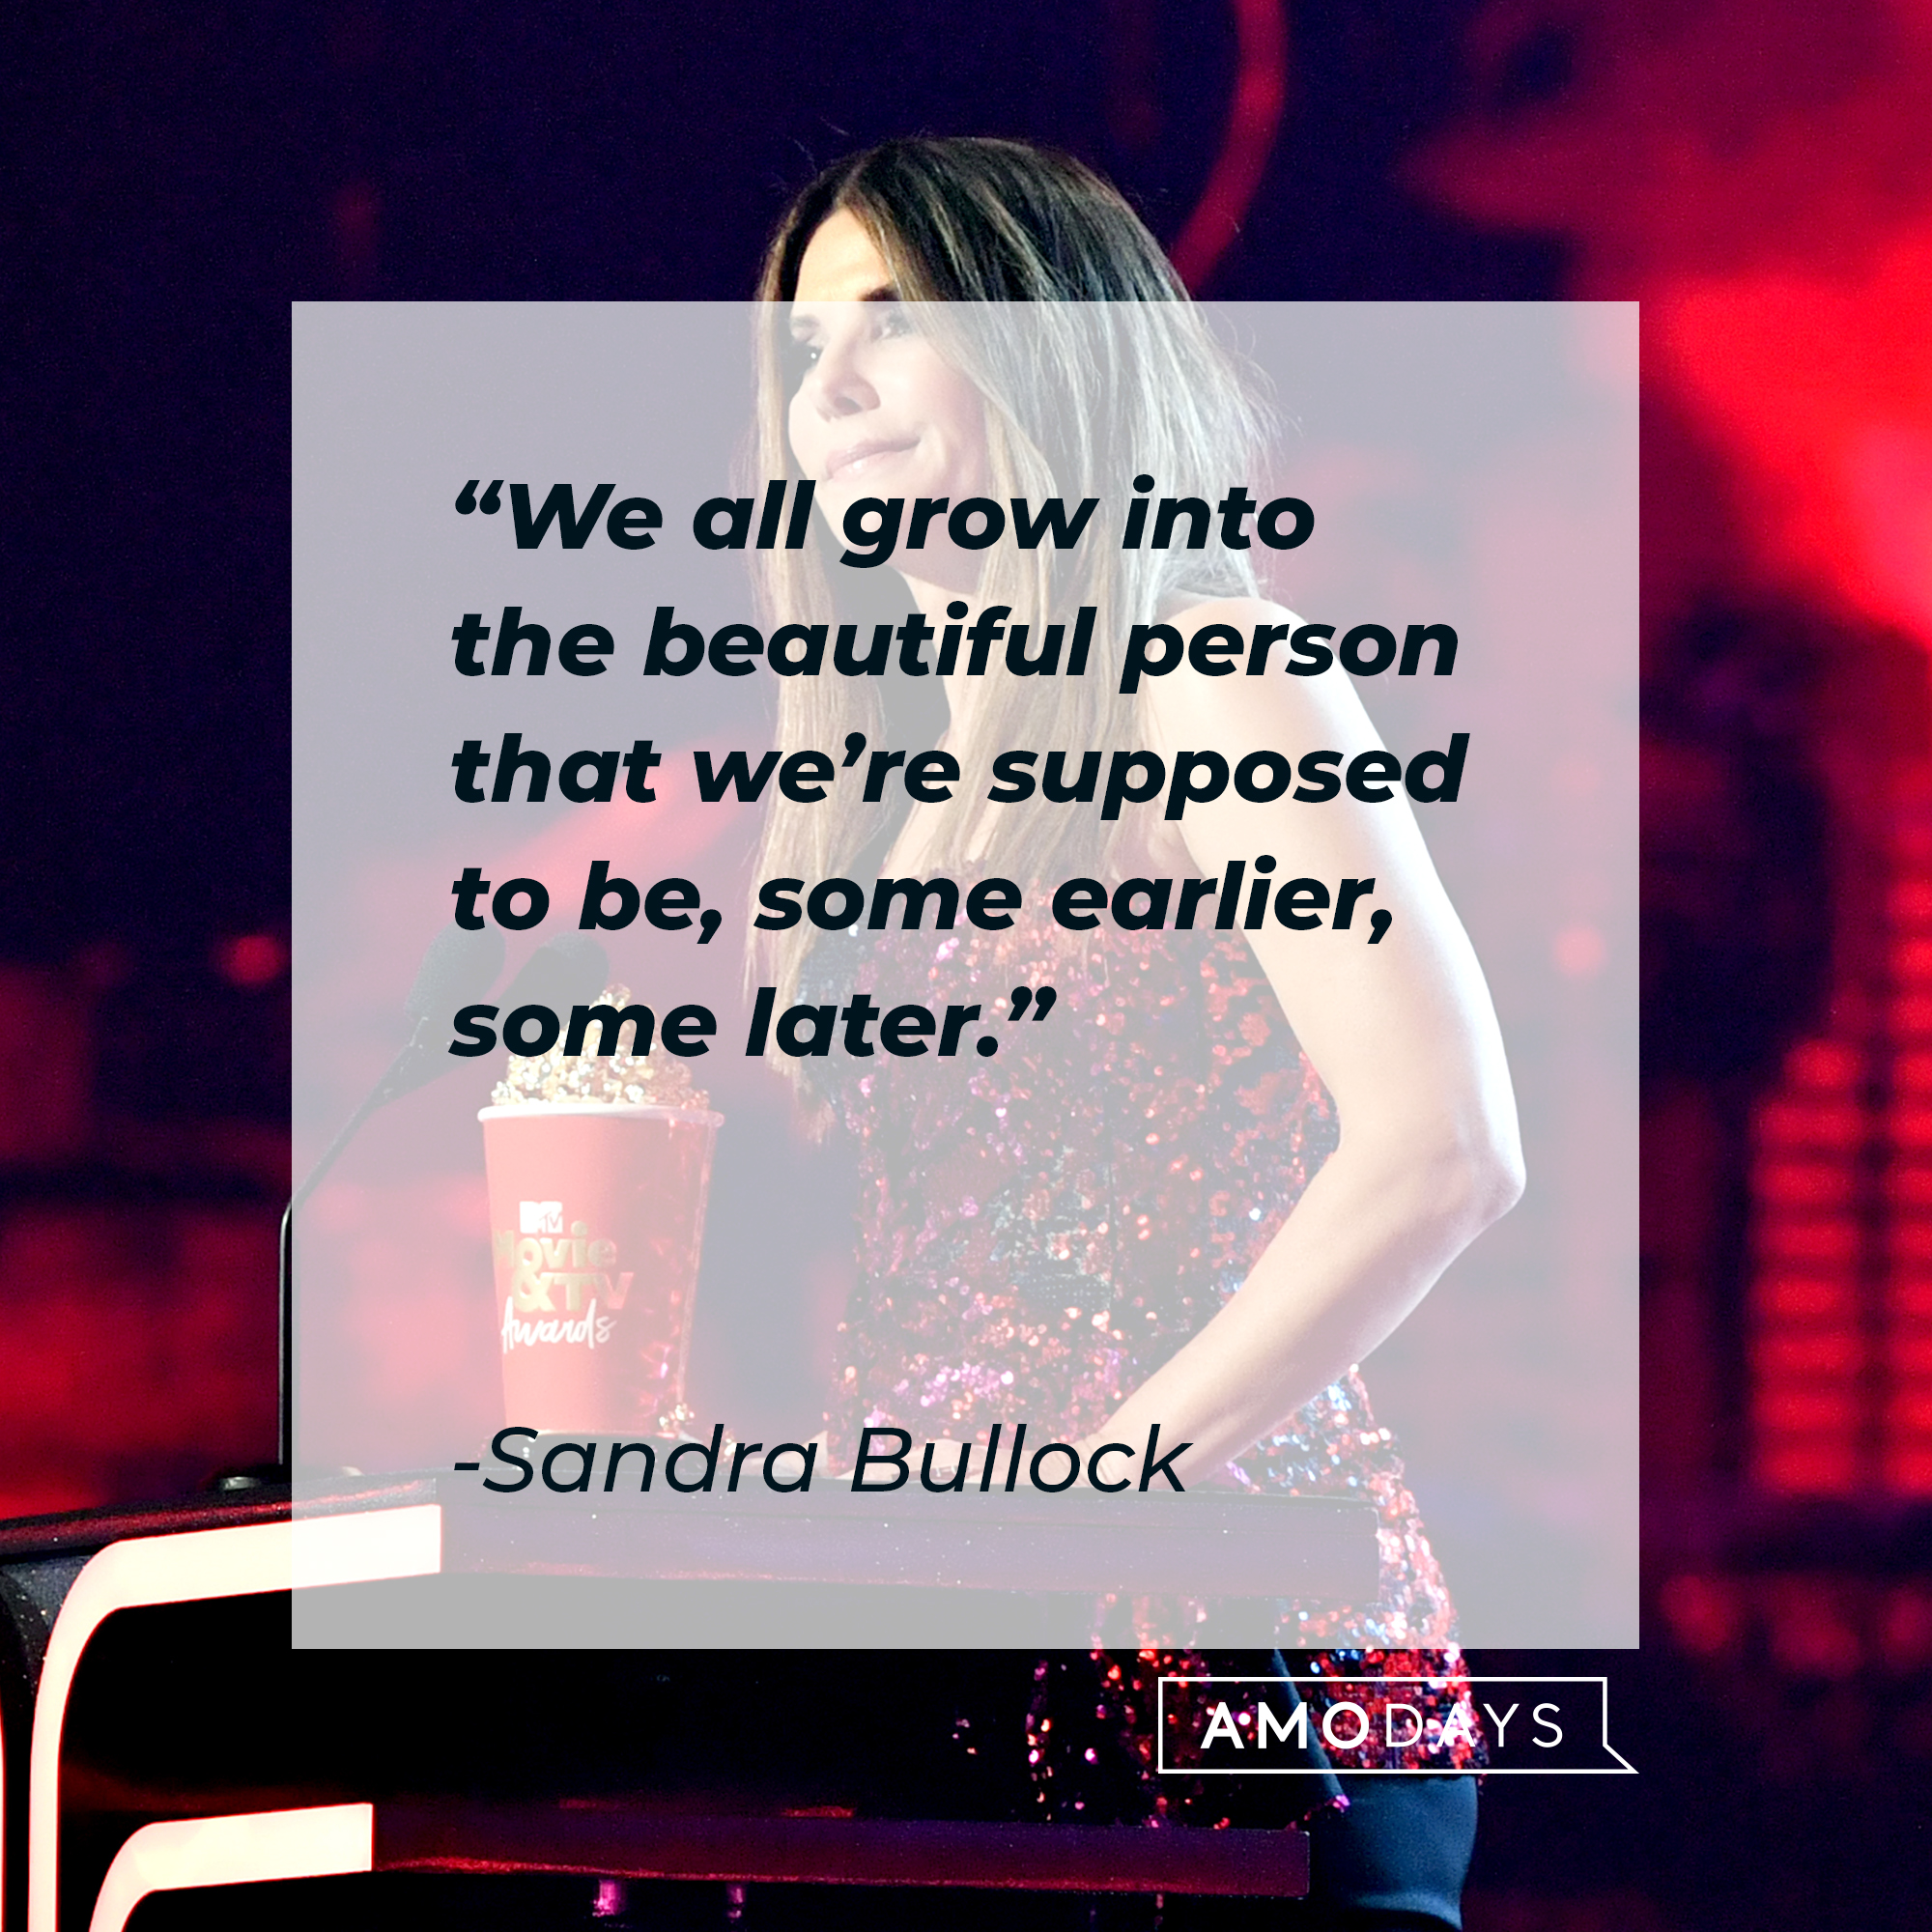 Sandra Bullock's quote: “We all grow into the beautiful person that we’re supposed to be, some earlier, some later.” | Source: Getty Images